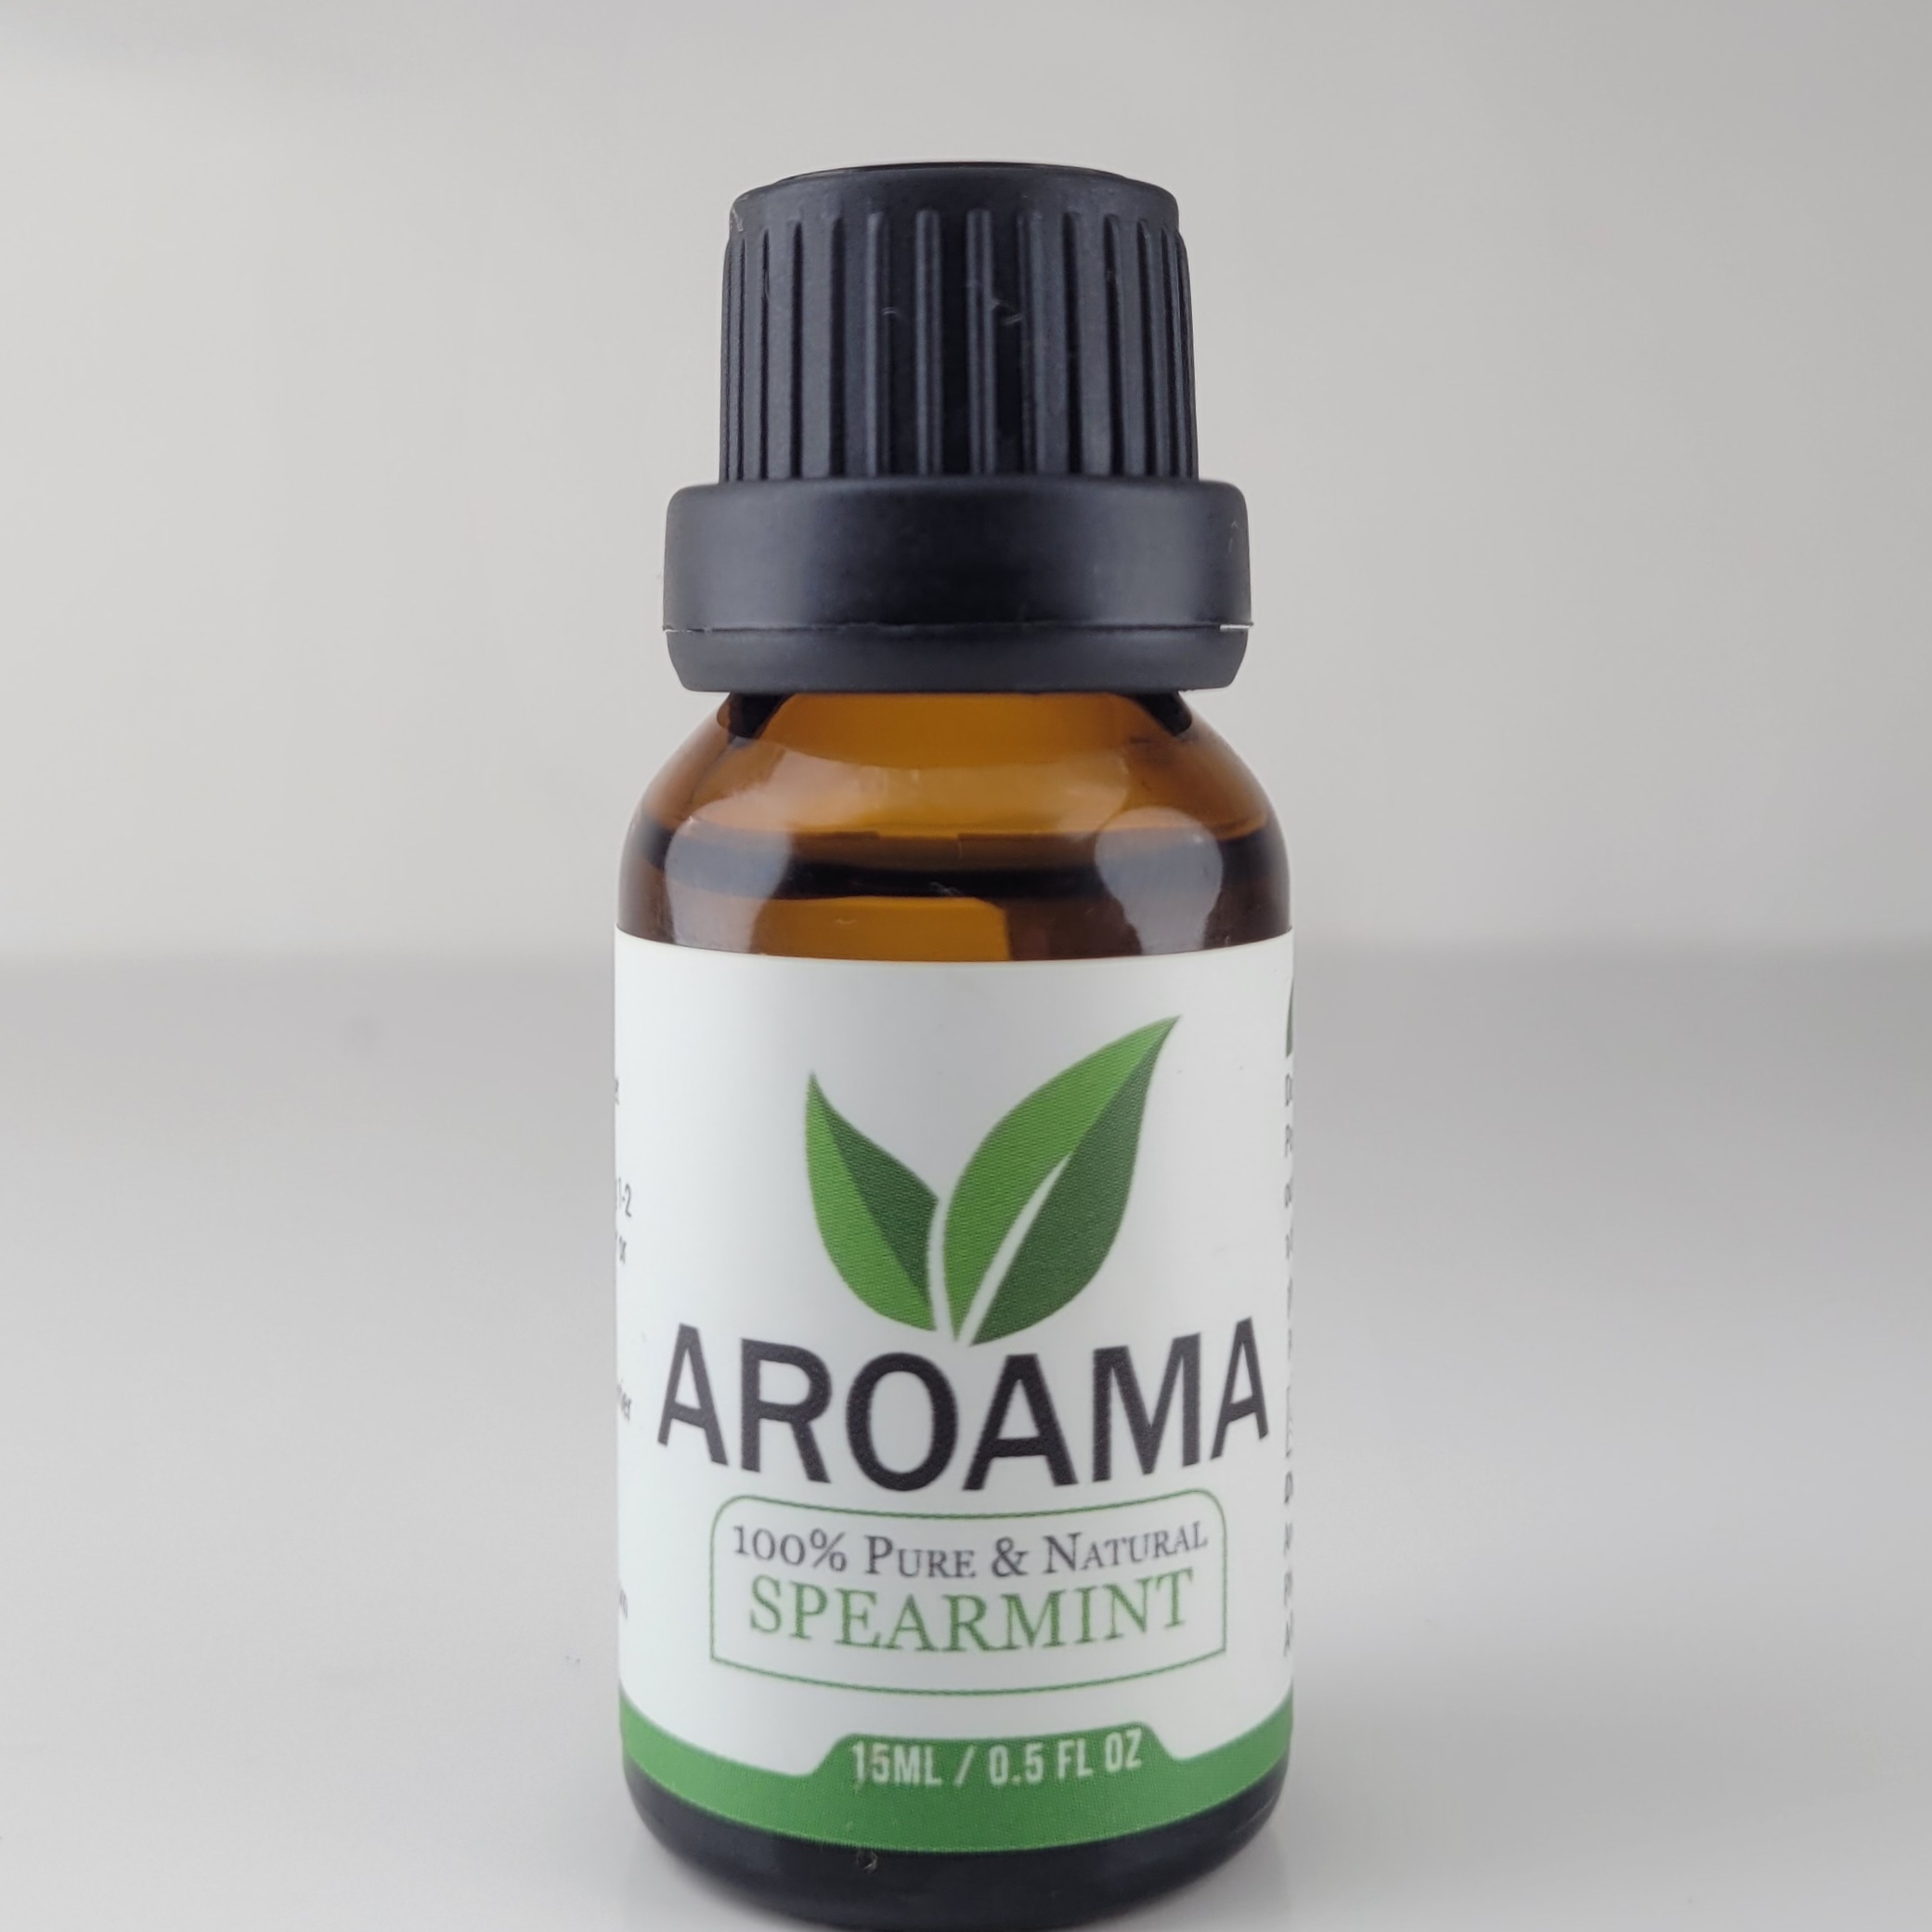 Spearmint Essential Oil from China / 15ml